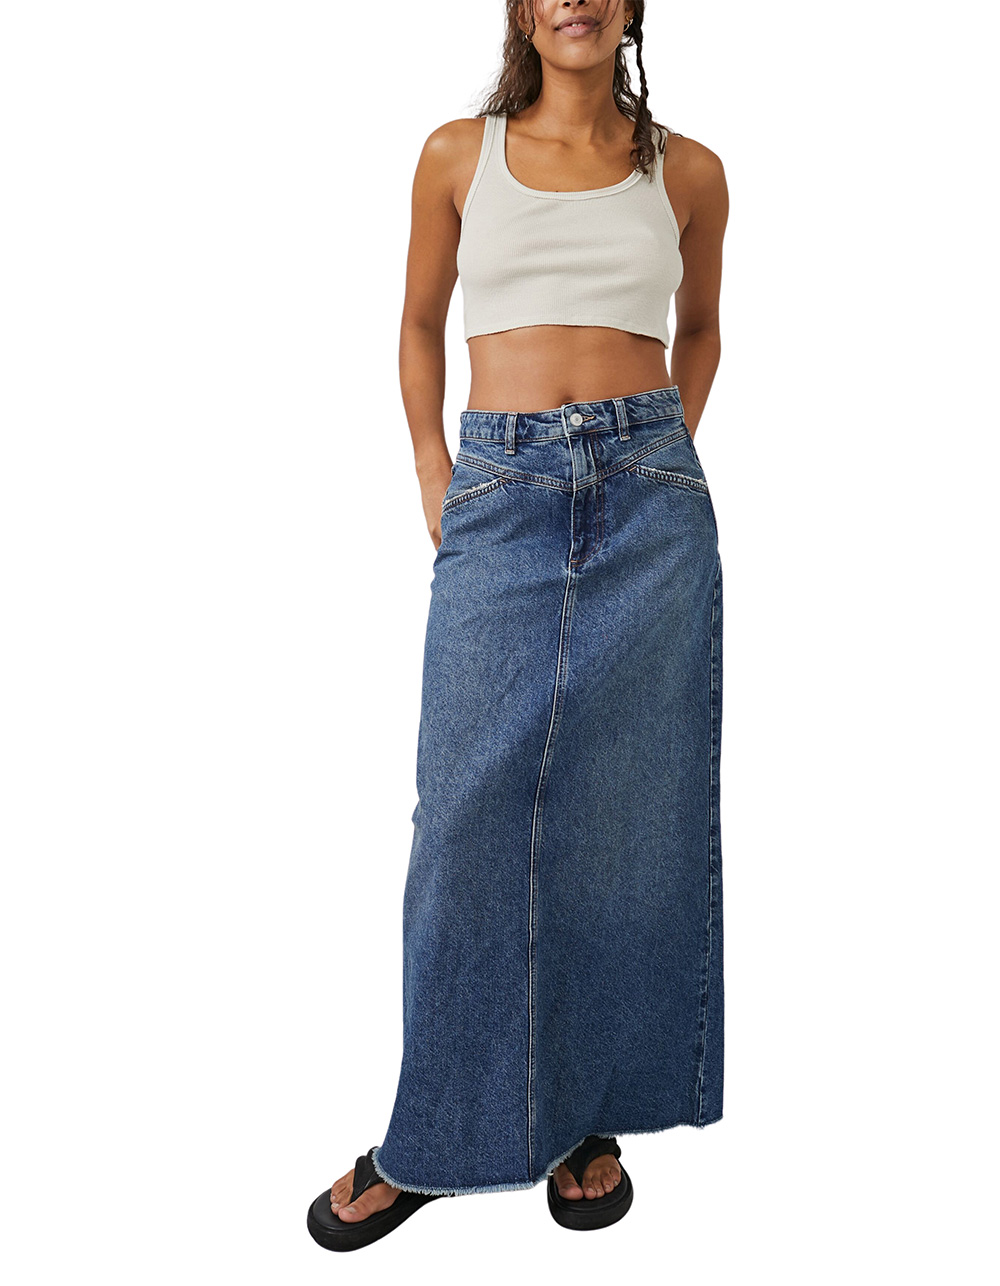 FREE PEOPLE Come As You Are Denim Maxi Skirt - MEDIUM WASH | Tillys